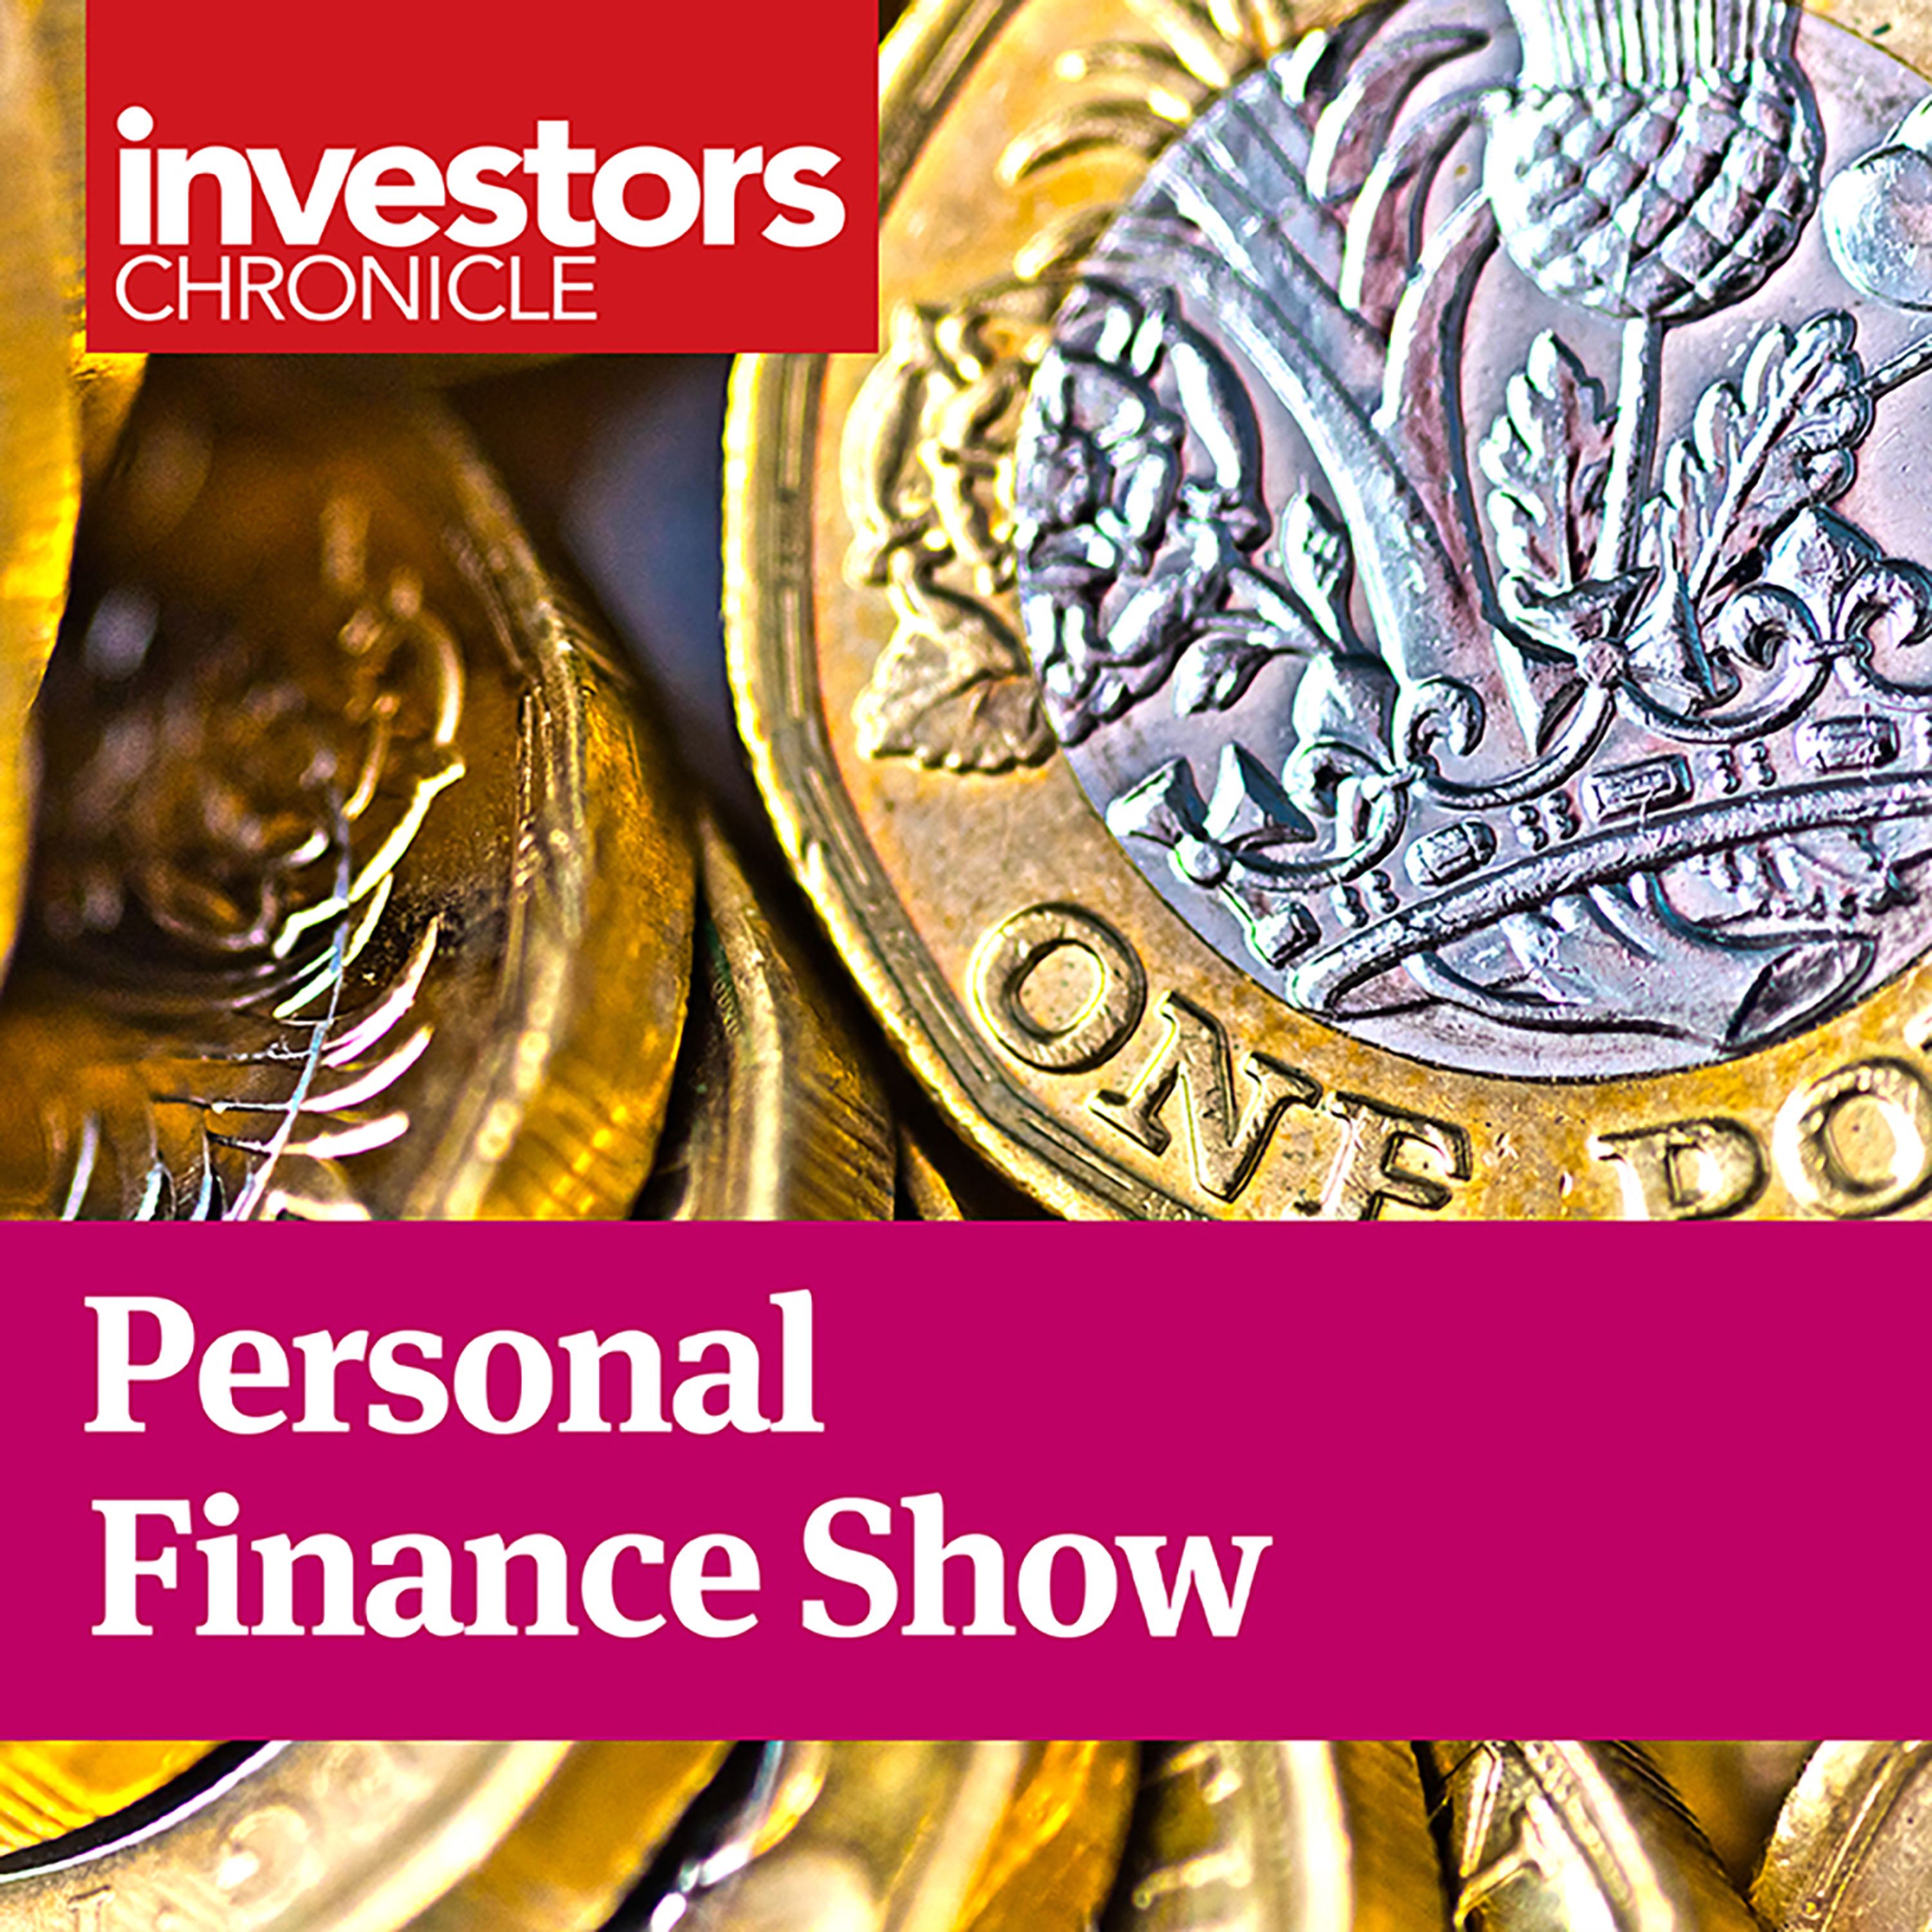 Personal Finance Show: Healthy yield via growth and a steady income